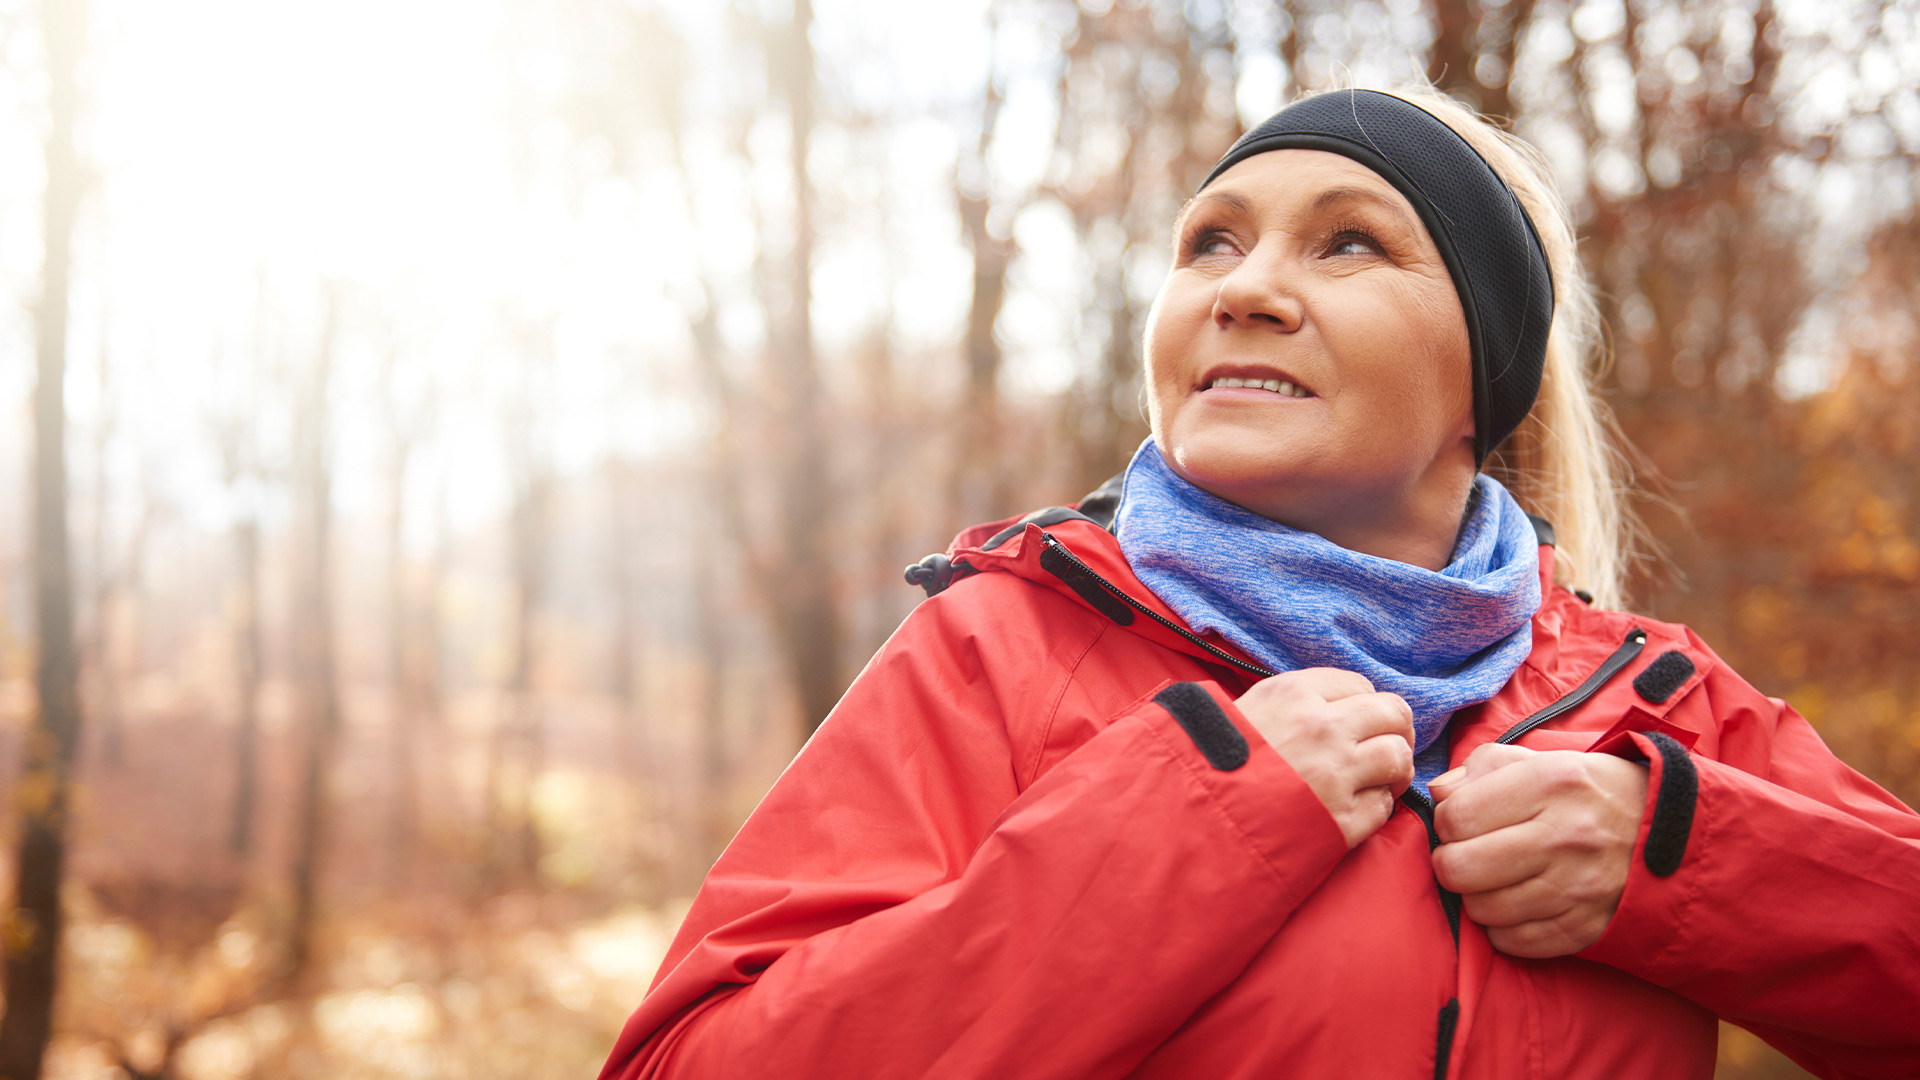 Don't let cold weather stop you from exercising. From layering to stretching, Paul Henson, MD, a sports medicine physician with Atrium Health Musculoskeletal Institute, has a few tips to keep you injury-free.